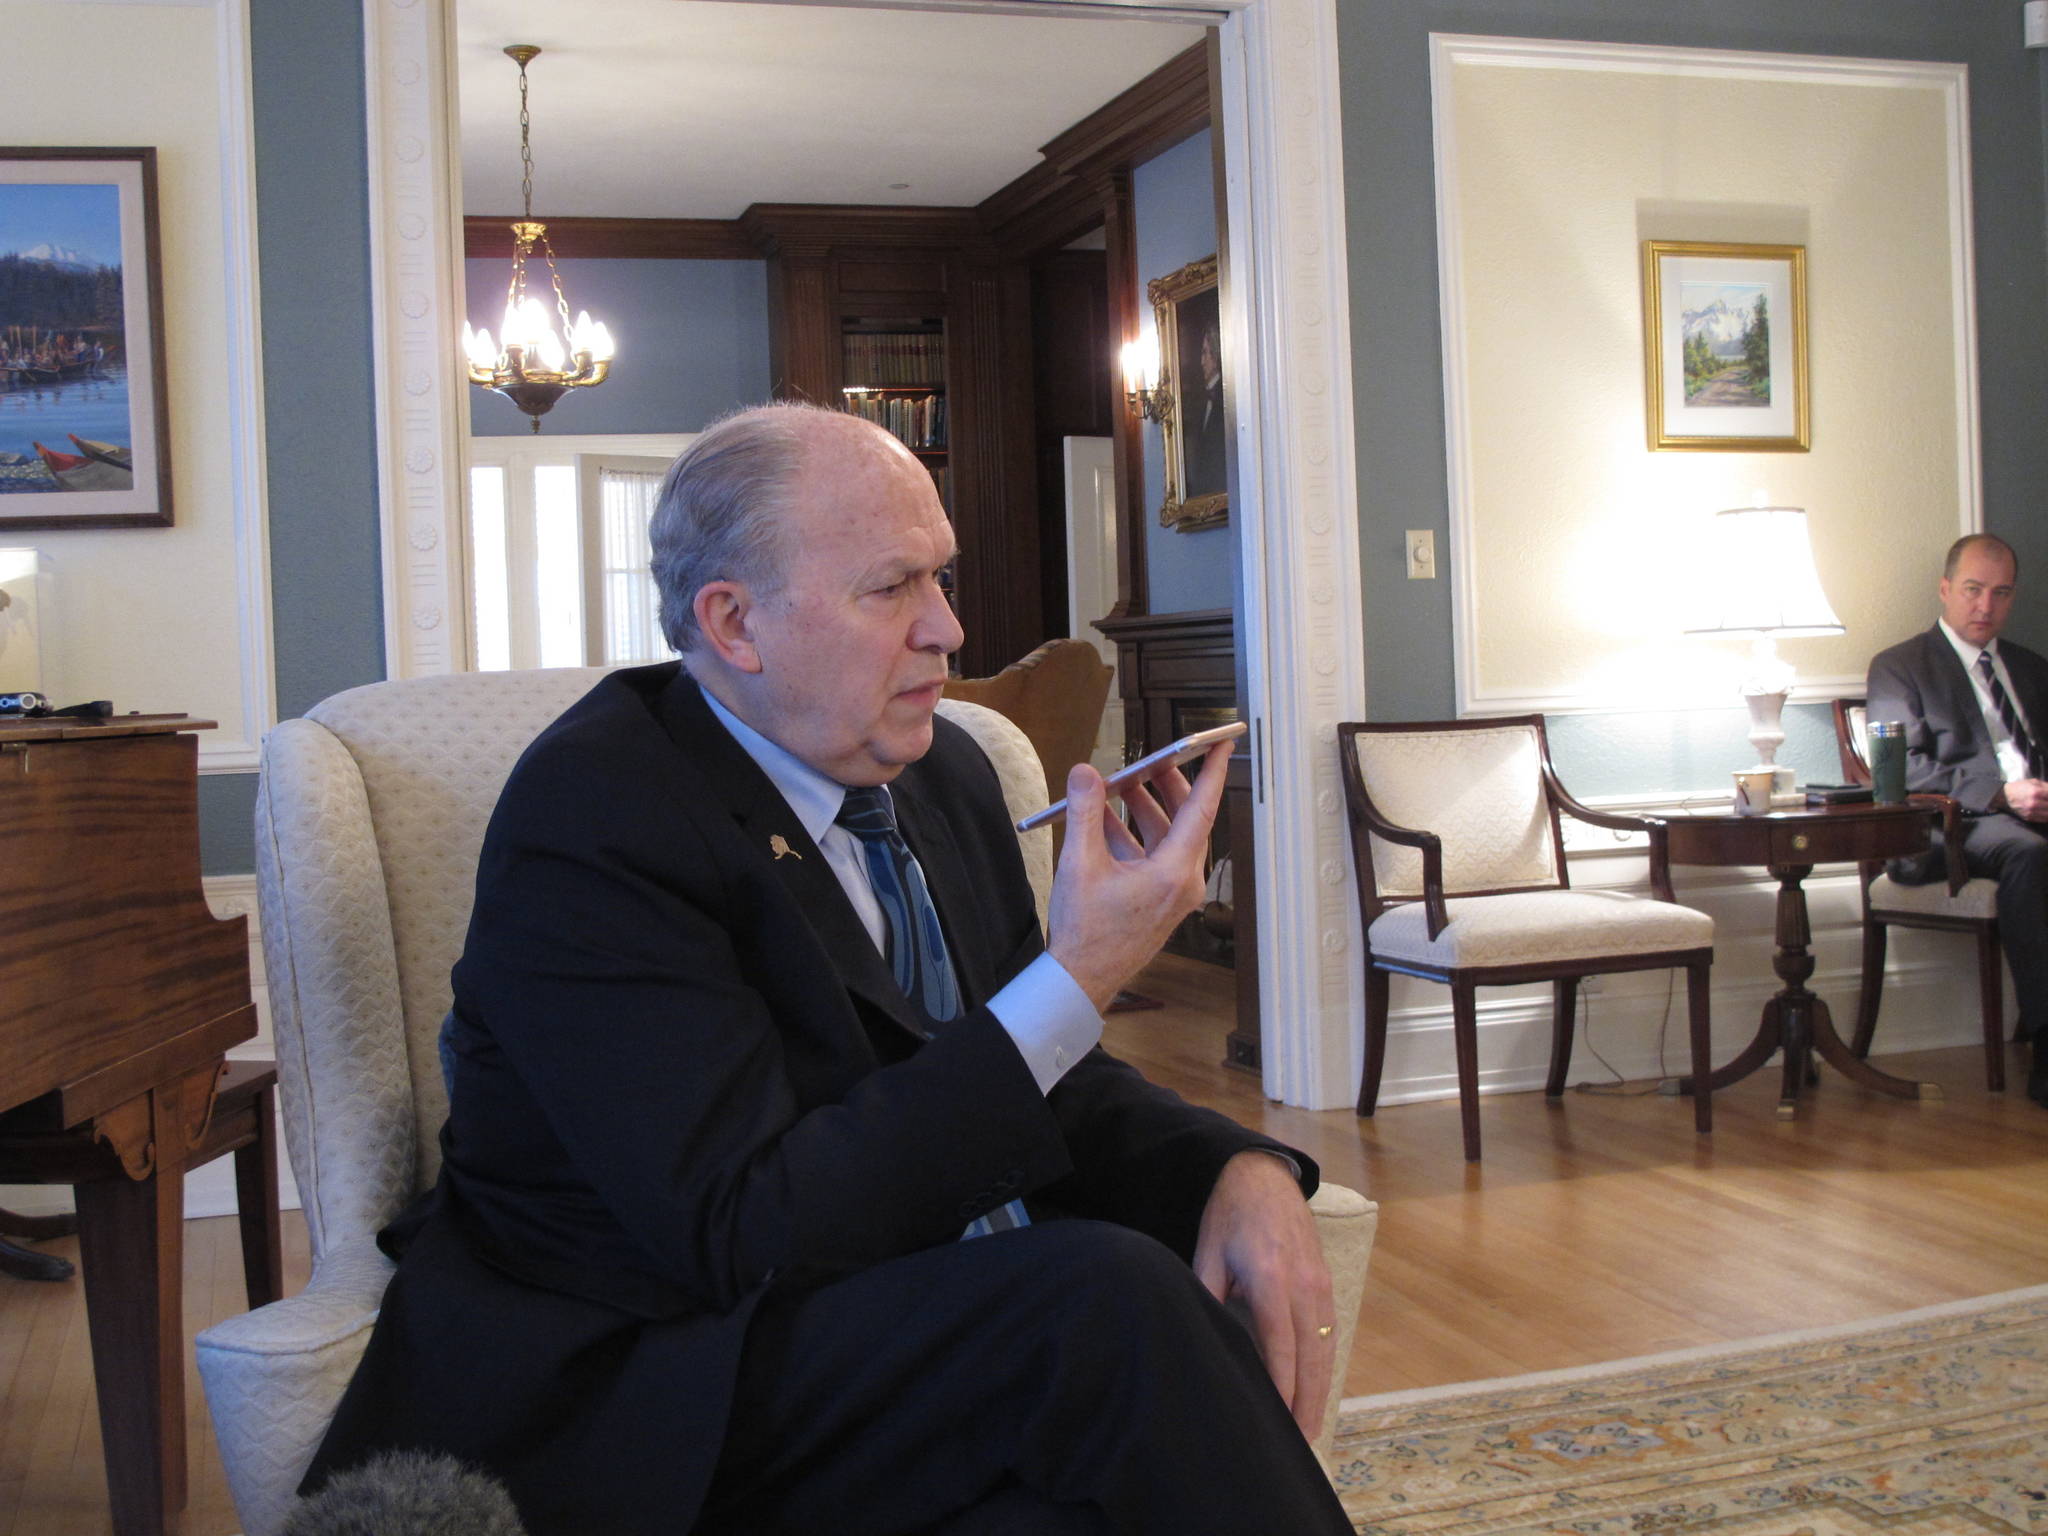 In this March 13 photo, Gov. Bill Walker speaks by phone to a reporter not physically present for a media availability at the governor’s mansion in Juneau. (AP Photo/Becky Bohrer)